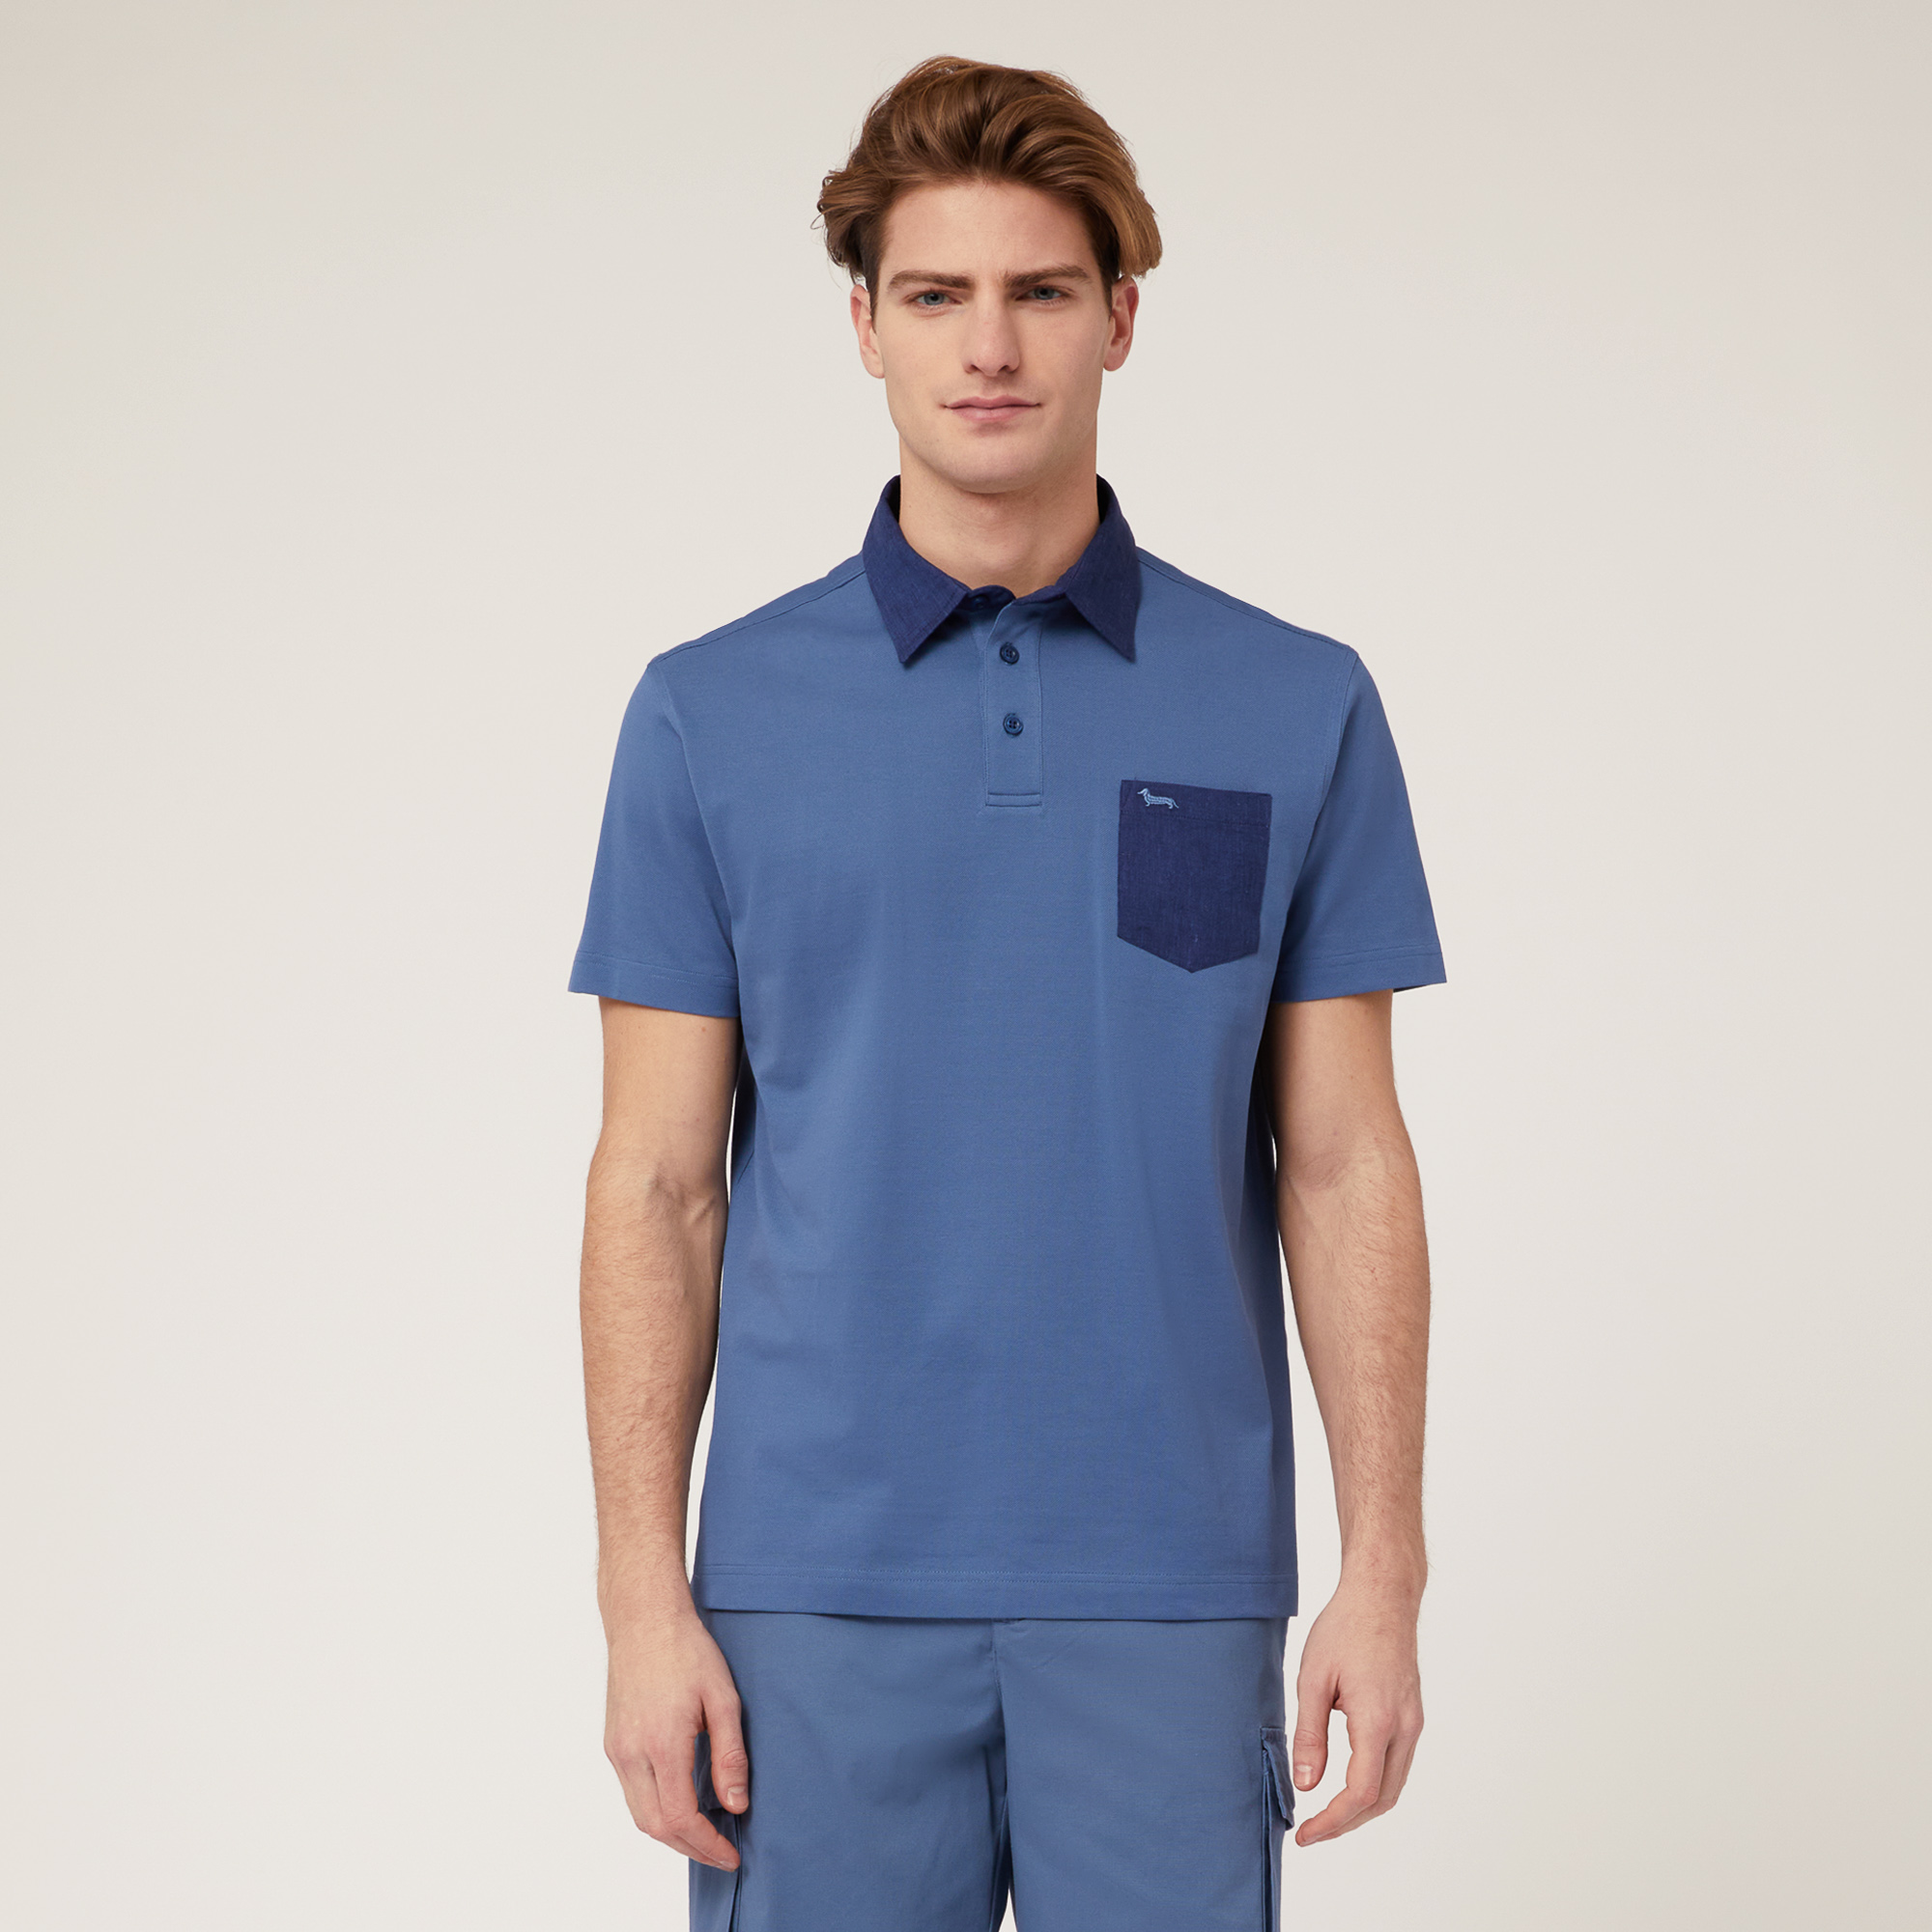 Polo with Pocket, Blue, large